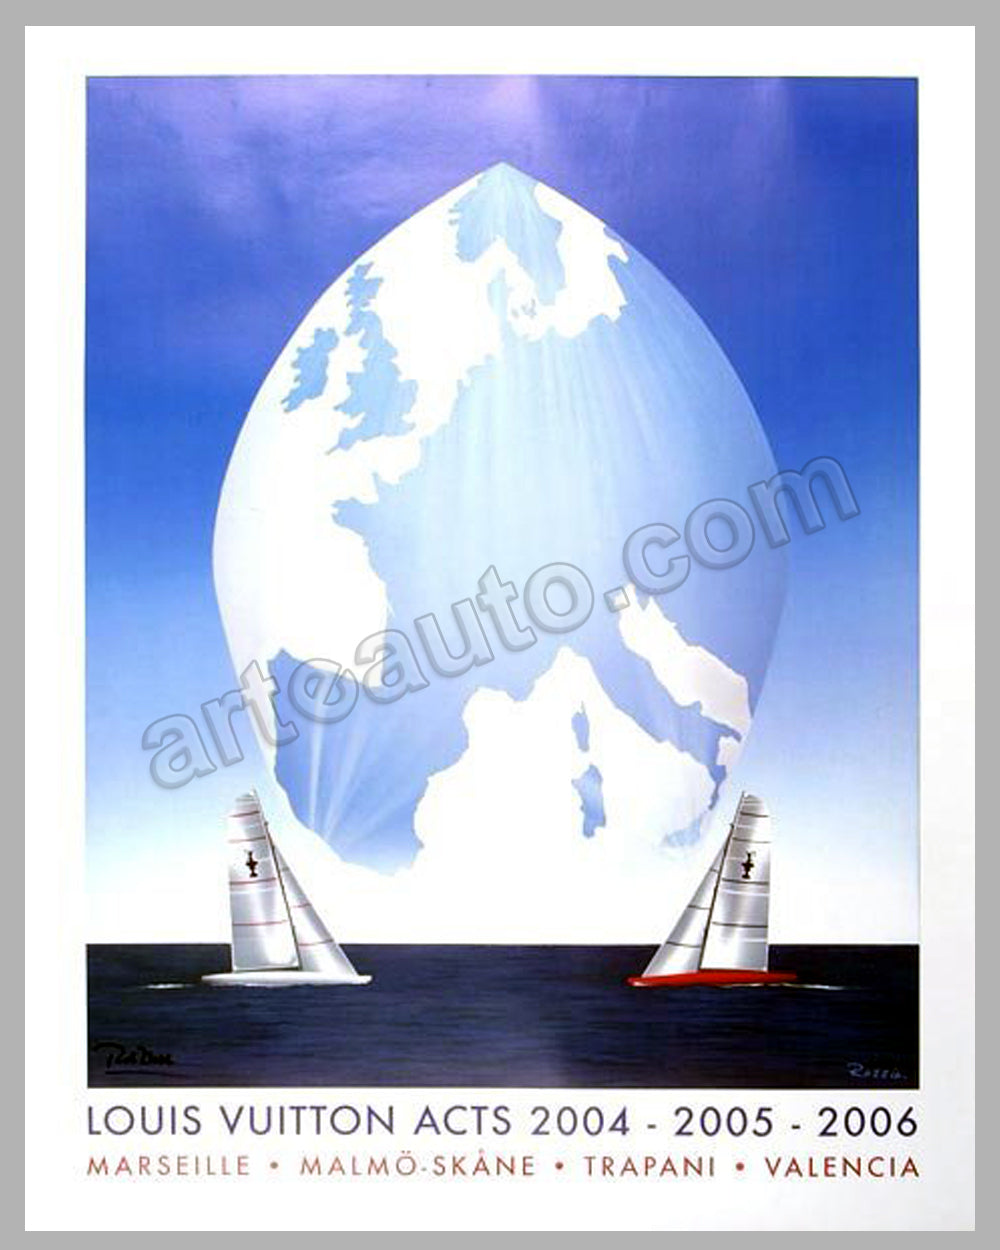 Louis Vuitton Acts 2004-2005-2006 large poster by Razzia